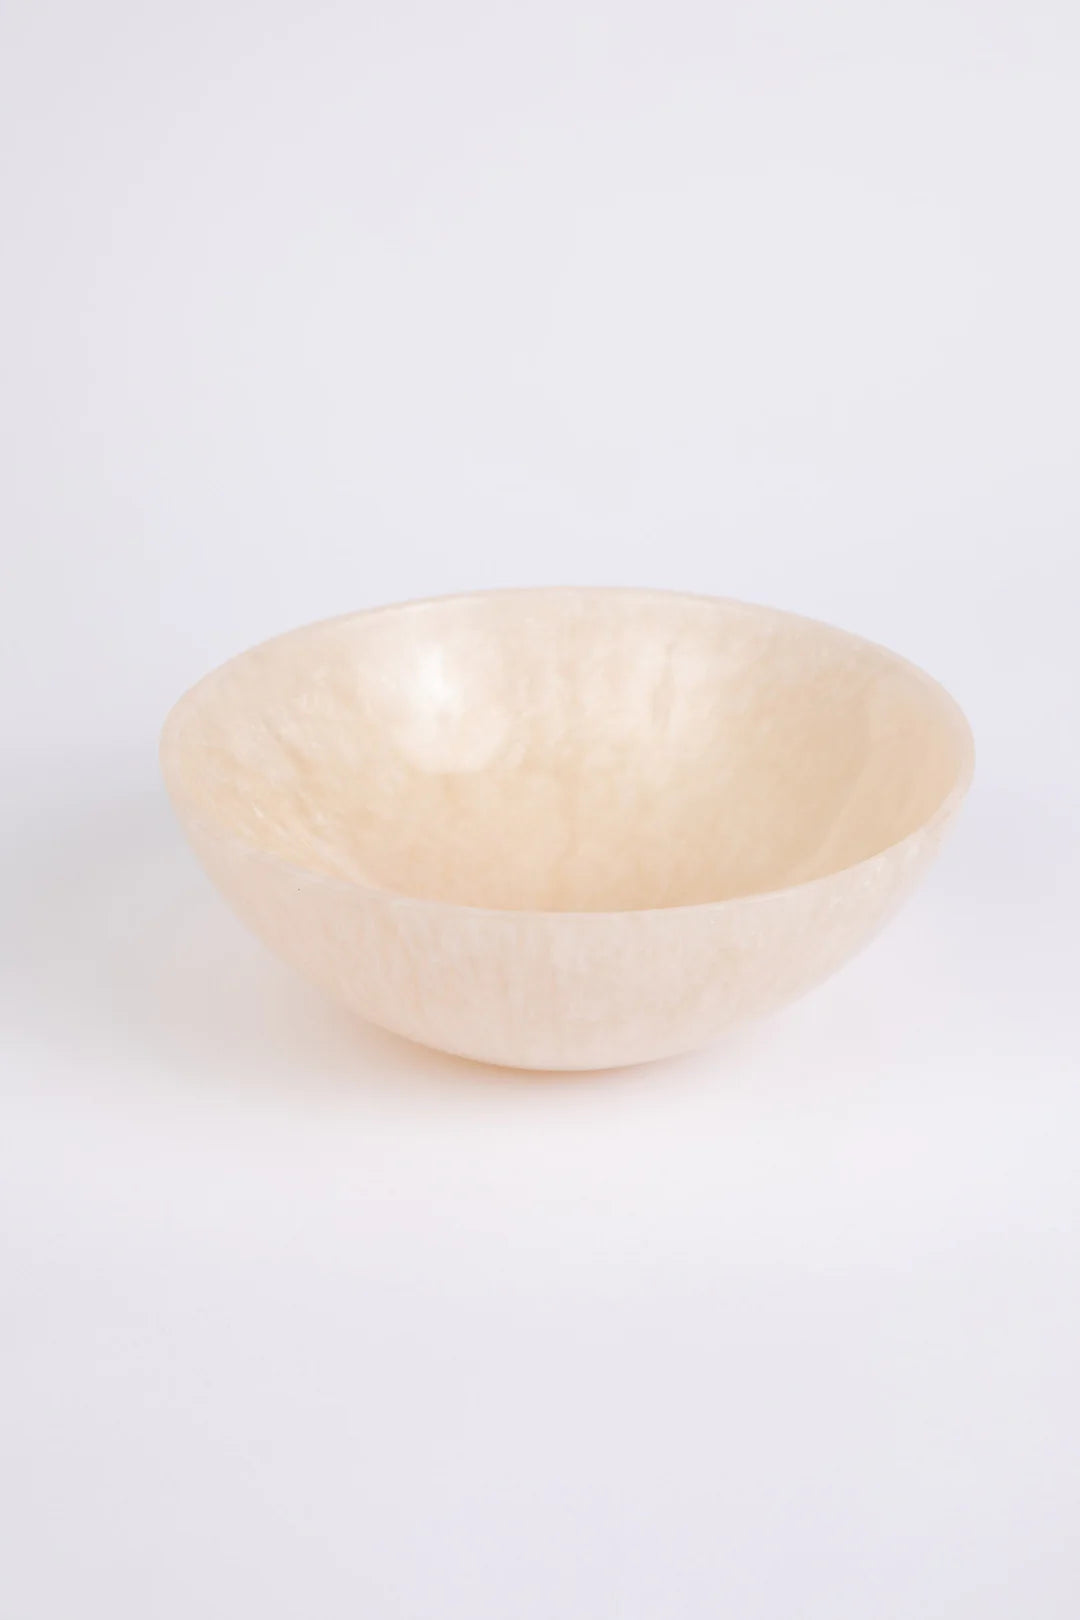 RESIN SMALL BOWL - IVORY